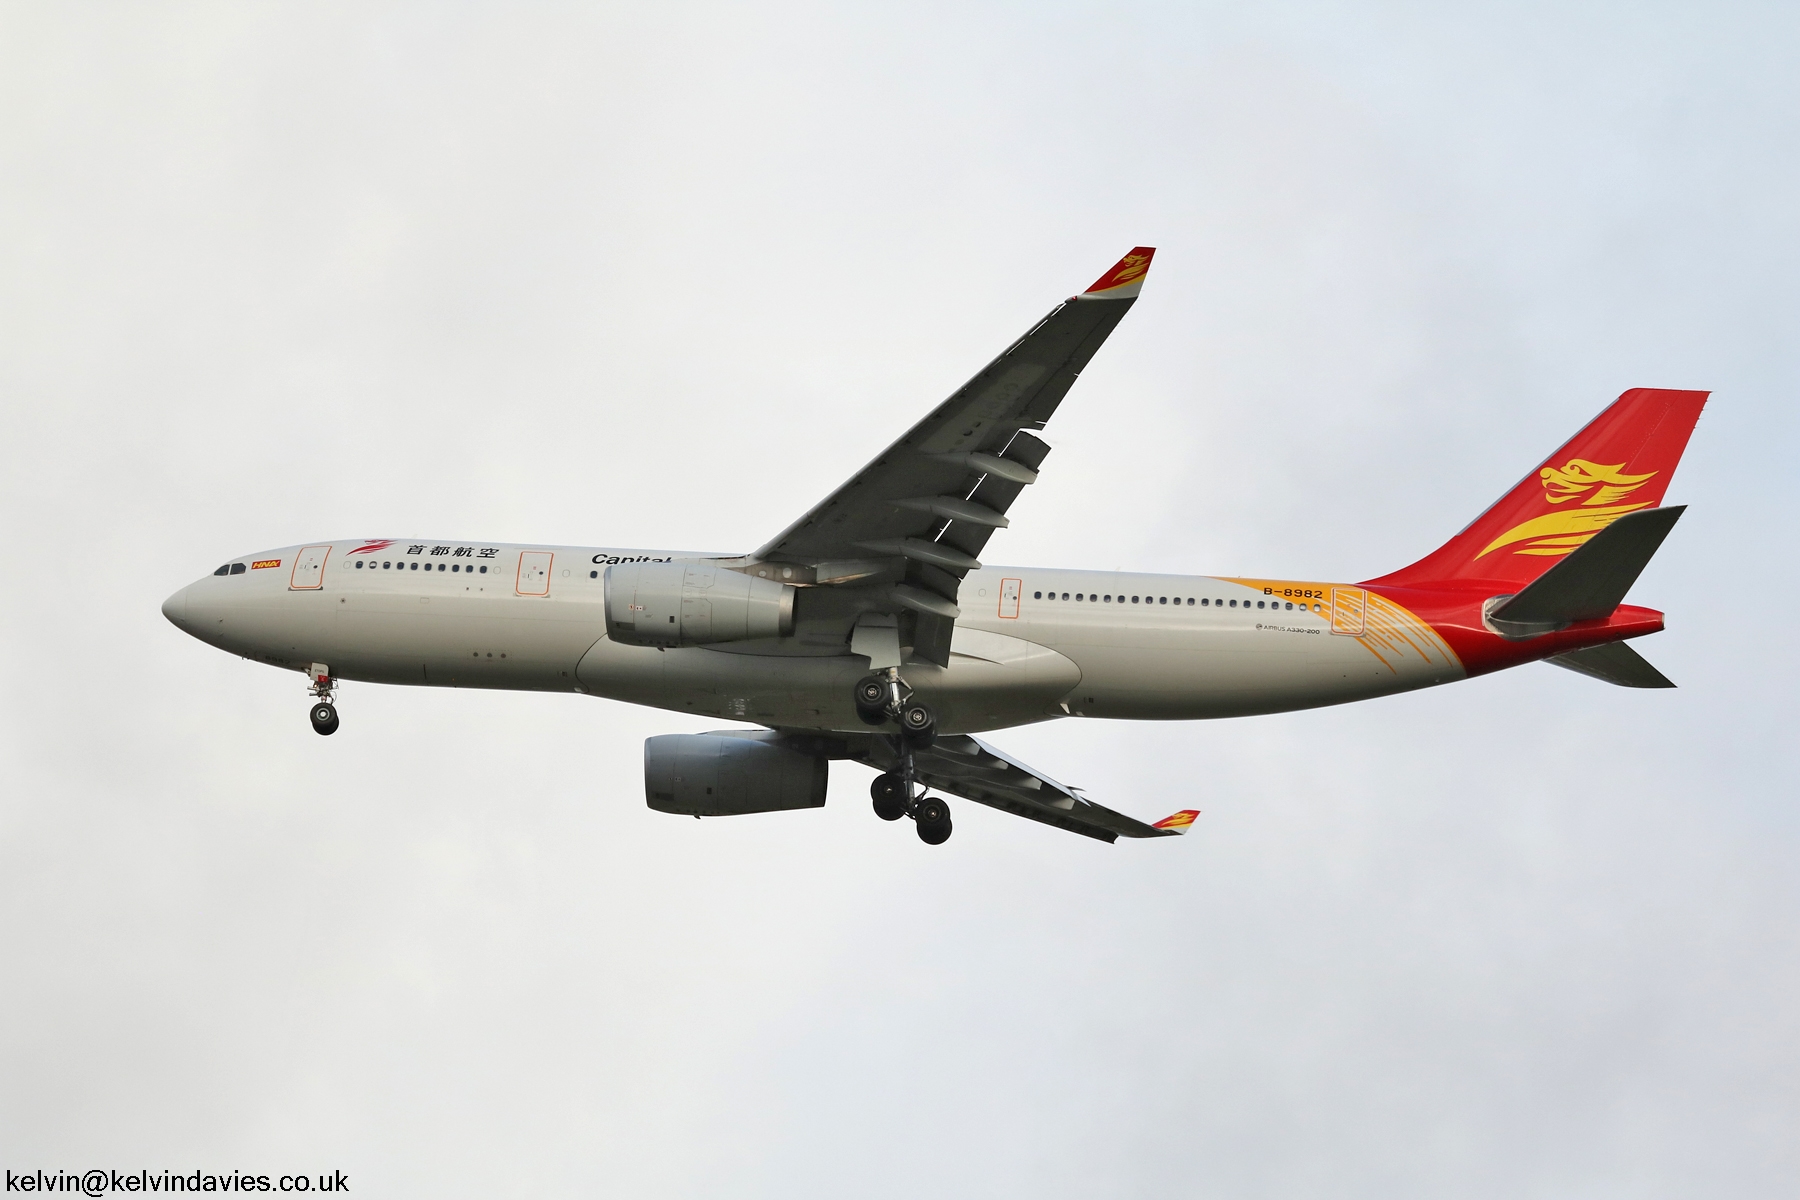 Capital Airlines A330 B-8982